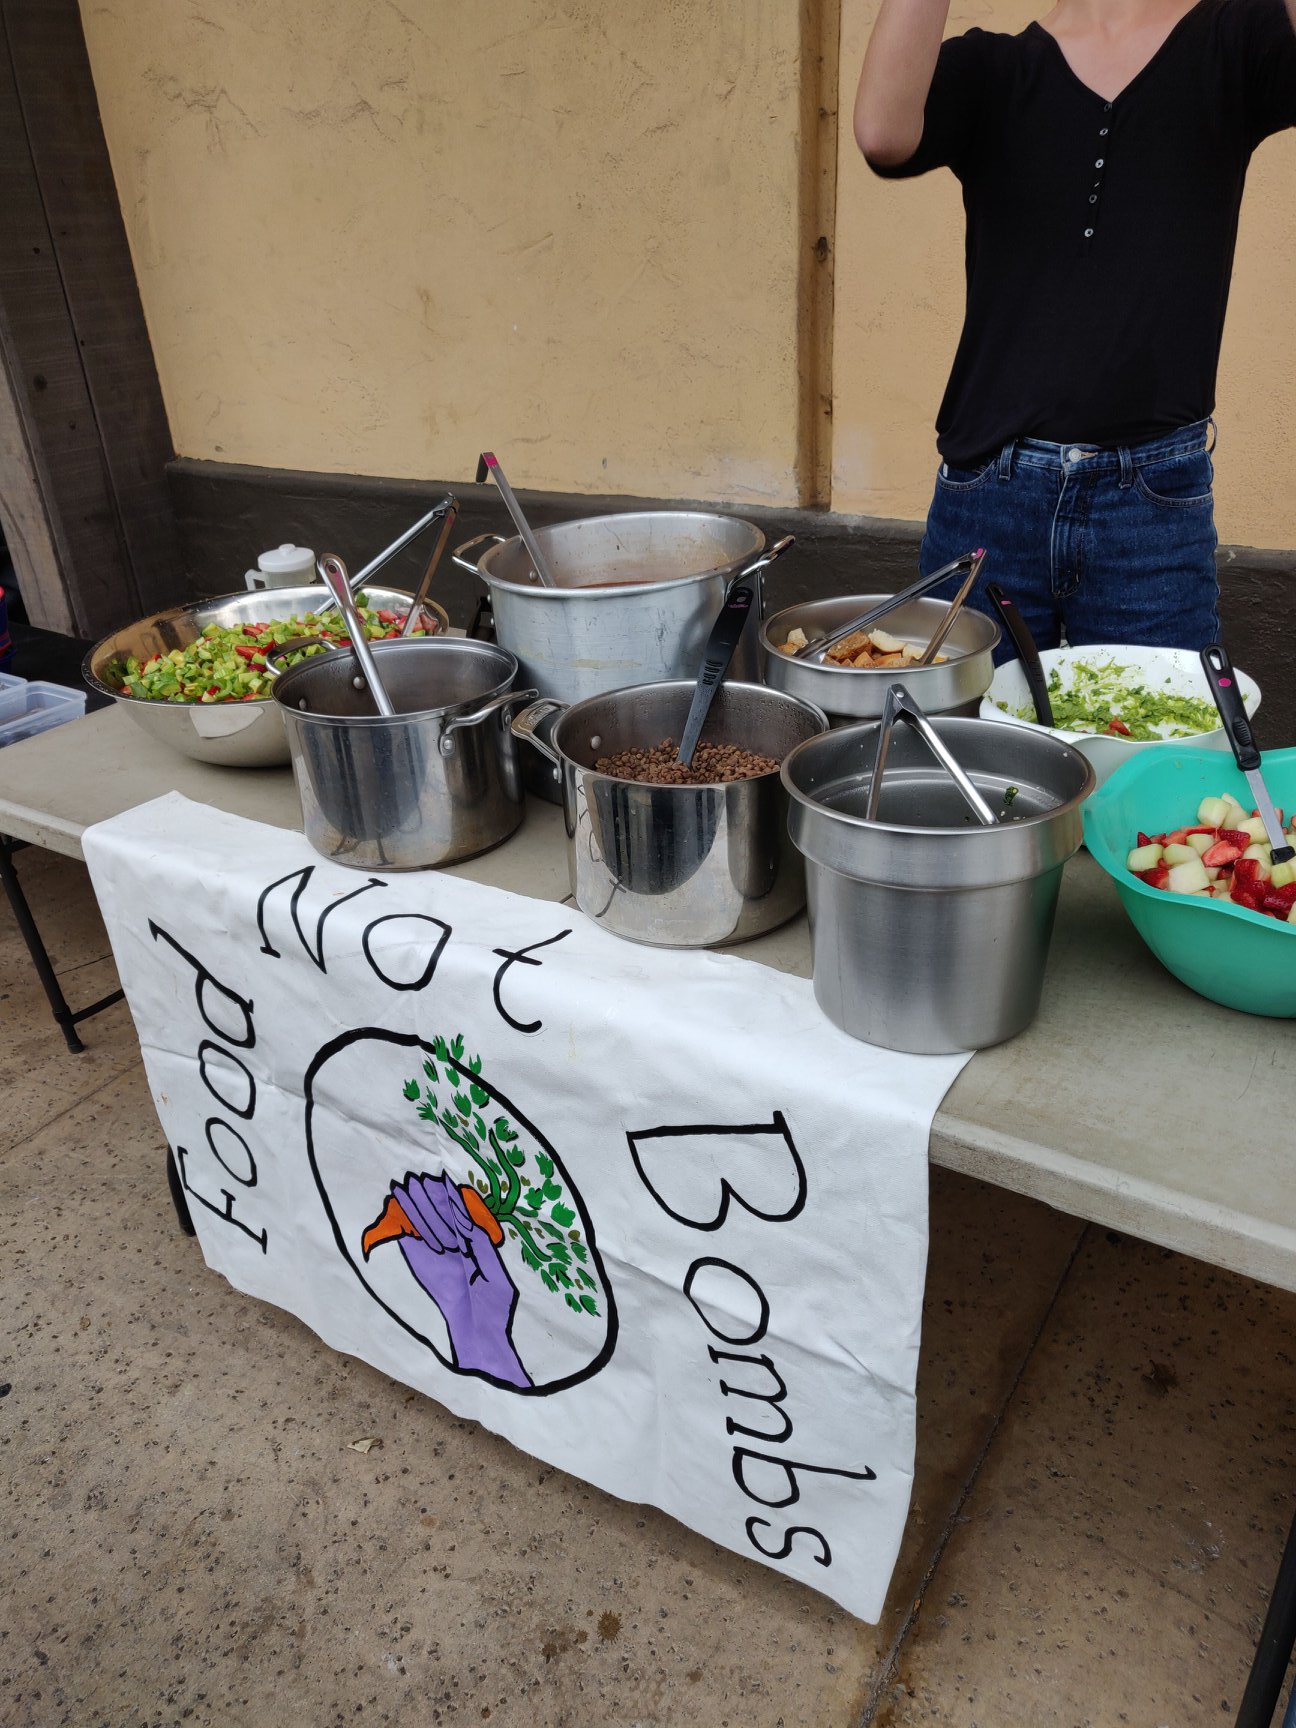 Isla Vista Food Not Bombs: More Than Just Meals, It’s ‘Basic Decency’